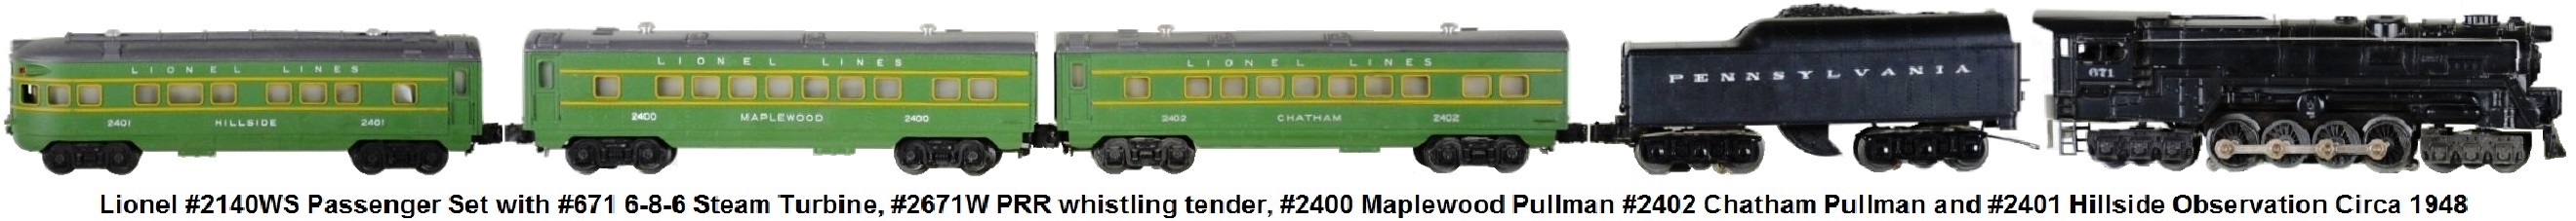 Lionel #2140WS Passenger Set with #671 6-8-6 Steam Turbine, #2671W PRR whistling tender #2400 Maplewood Pullman, #2402 Chatham Pullman and #2401 Hillside observation made 1948